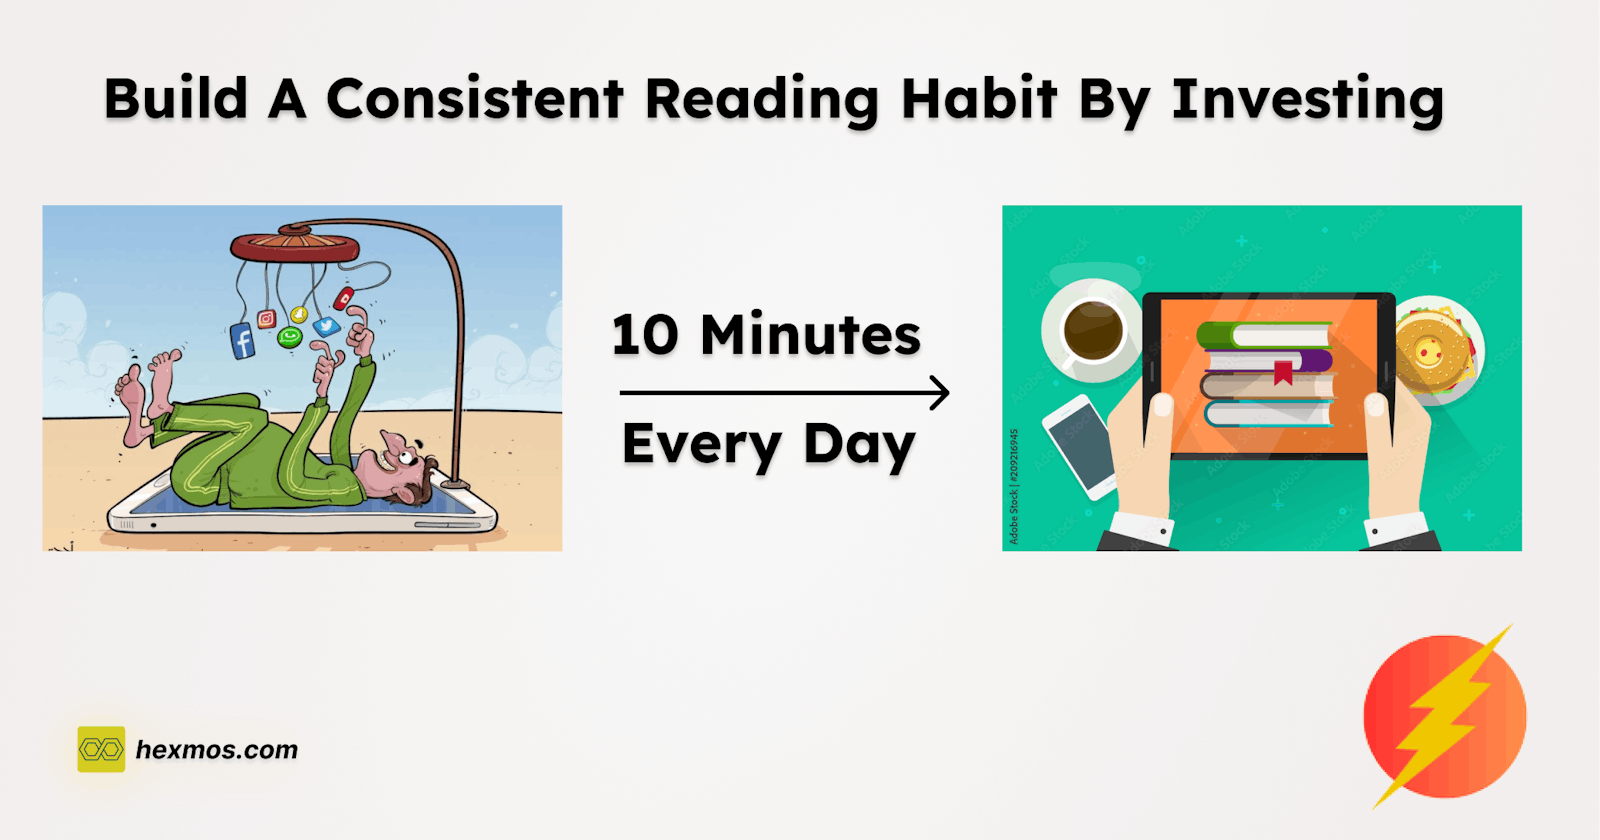 Build a Consistent Reading Habit by Investing 10 Minutes Every Day